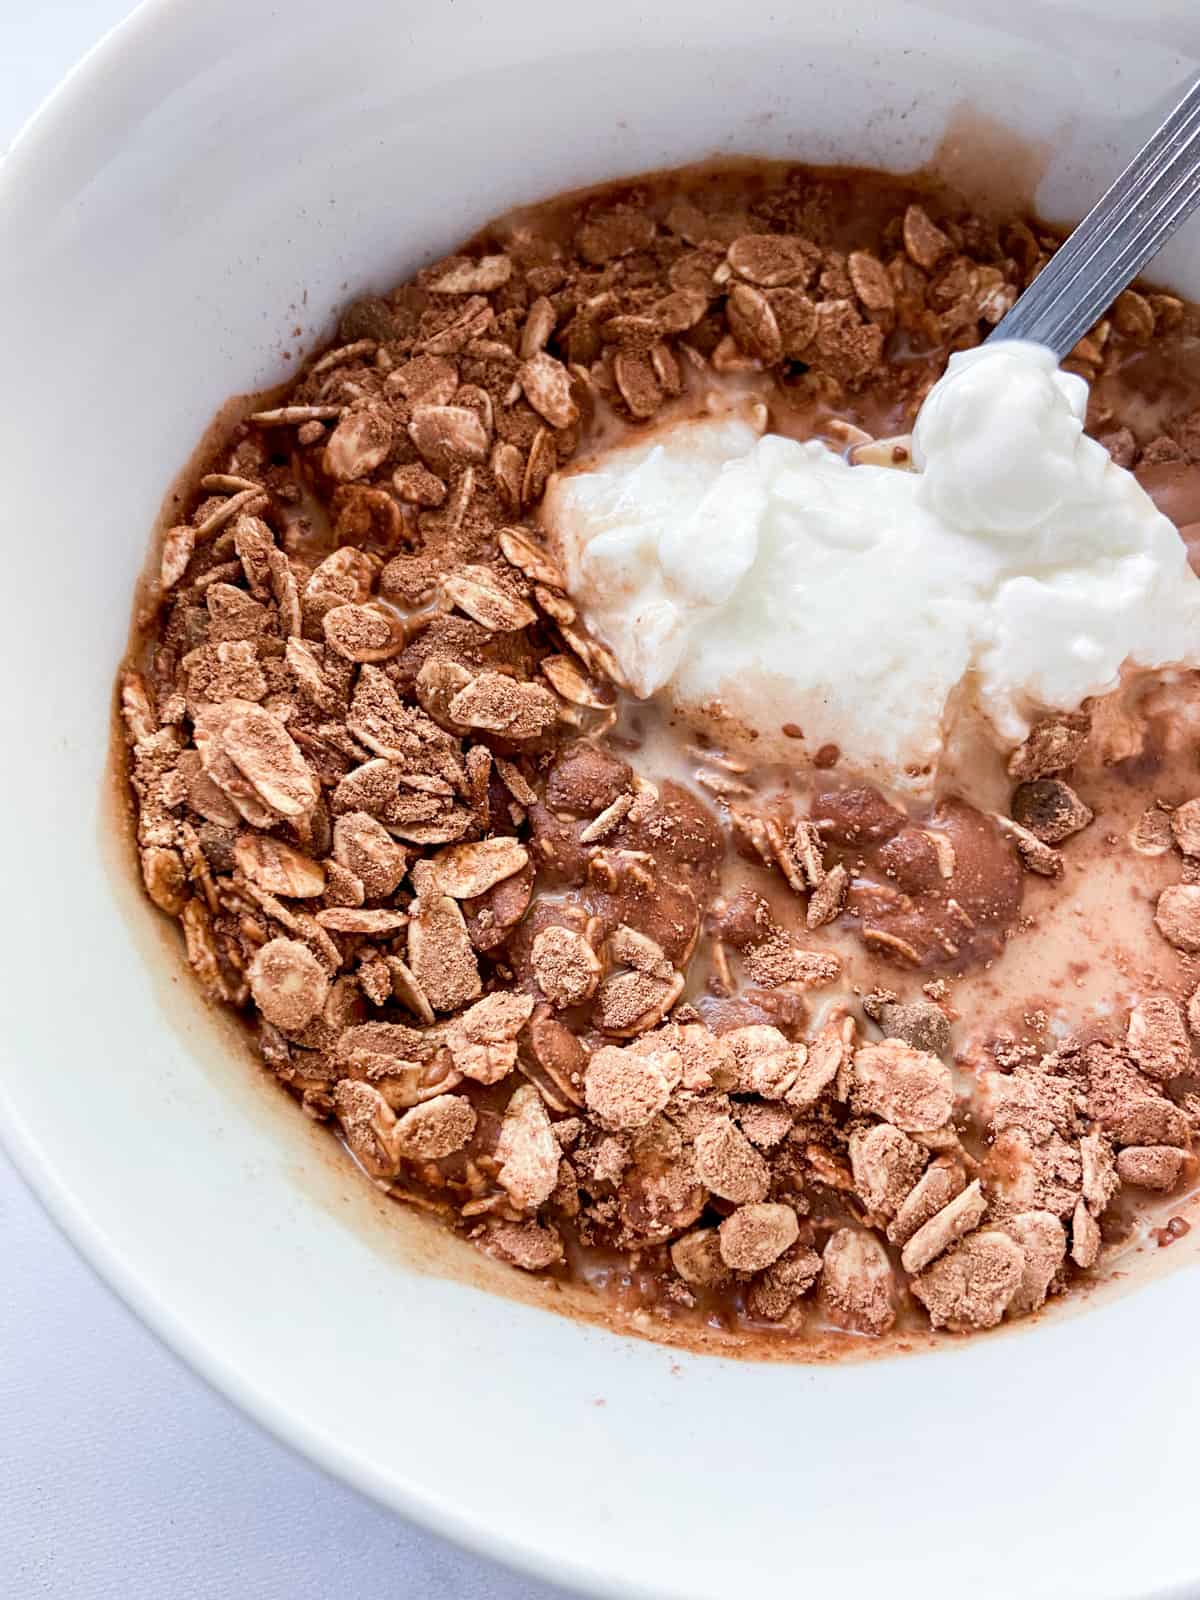 Dry ingredients with yogurt and milk added in a bowl.